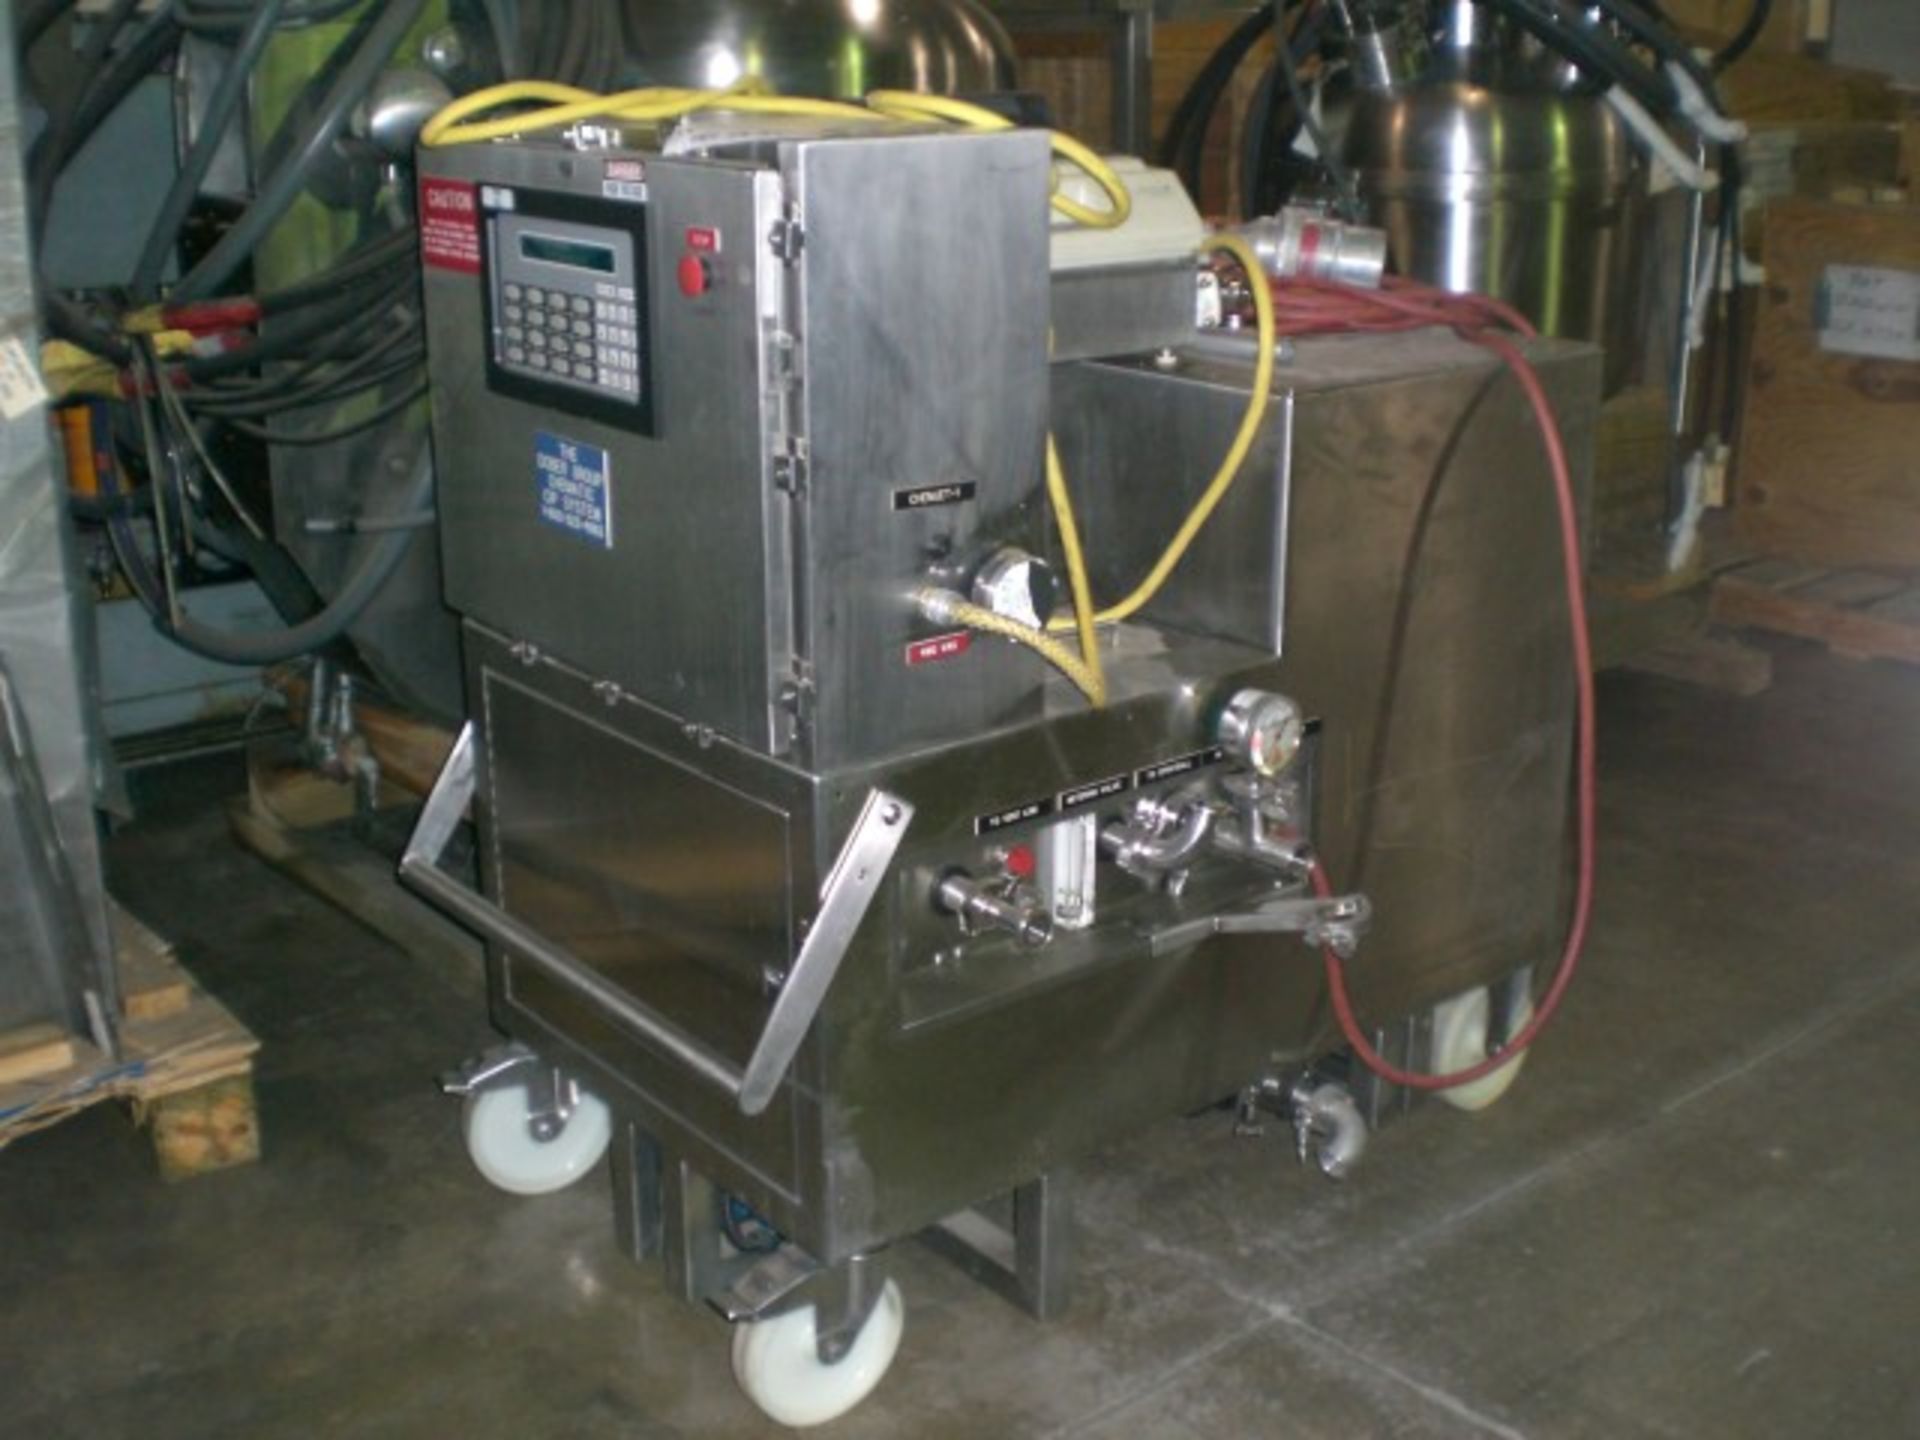 Dober Group CIP system, chematic design, stainless steel construction with (2) 1/2 HP circulation